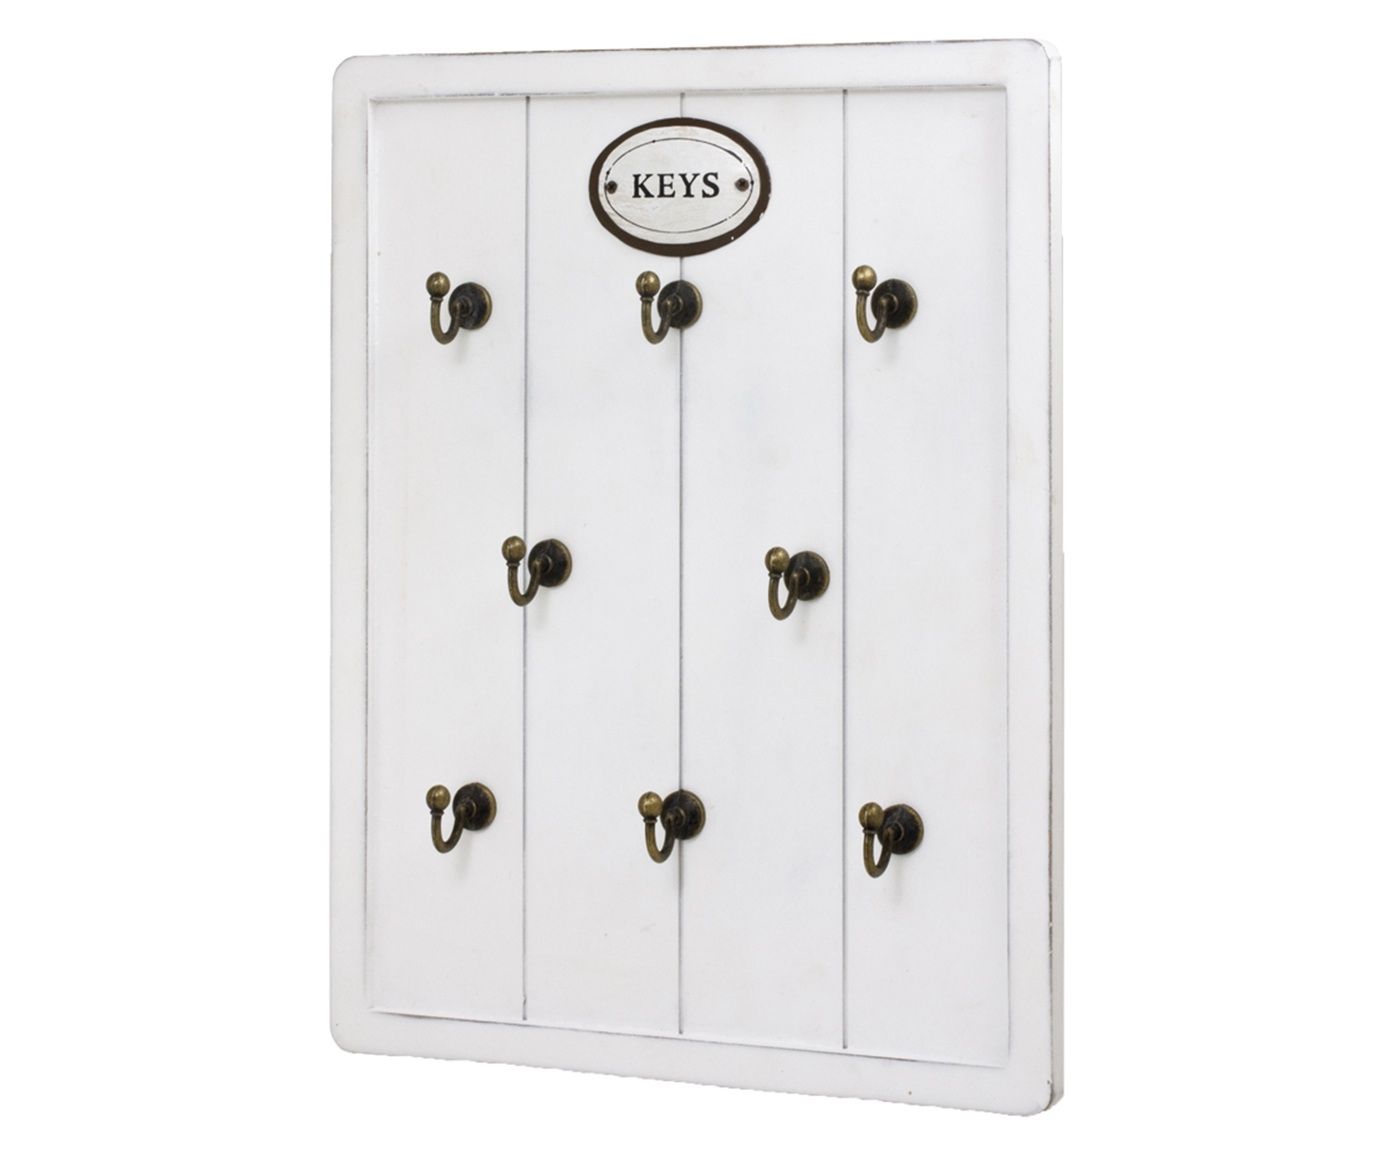 Suporte para chaves keys | Westwing.com.br